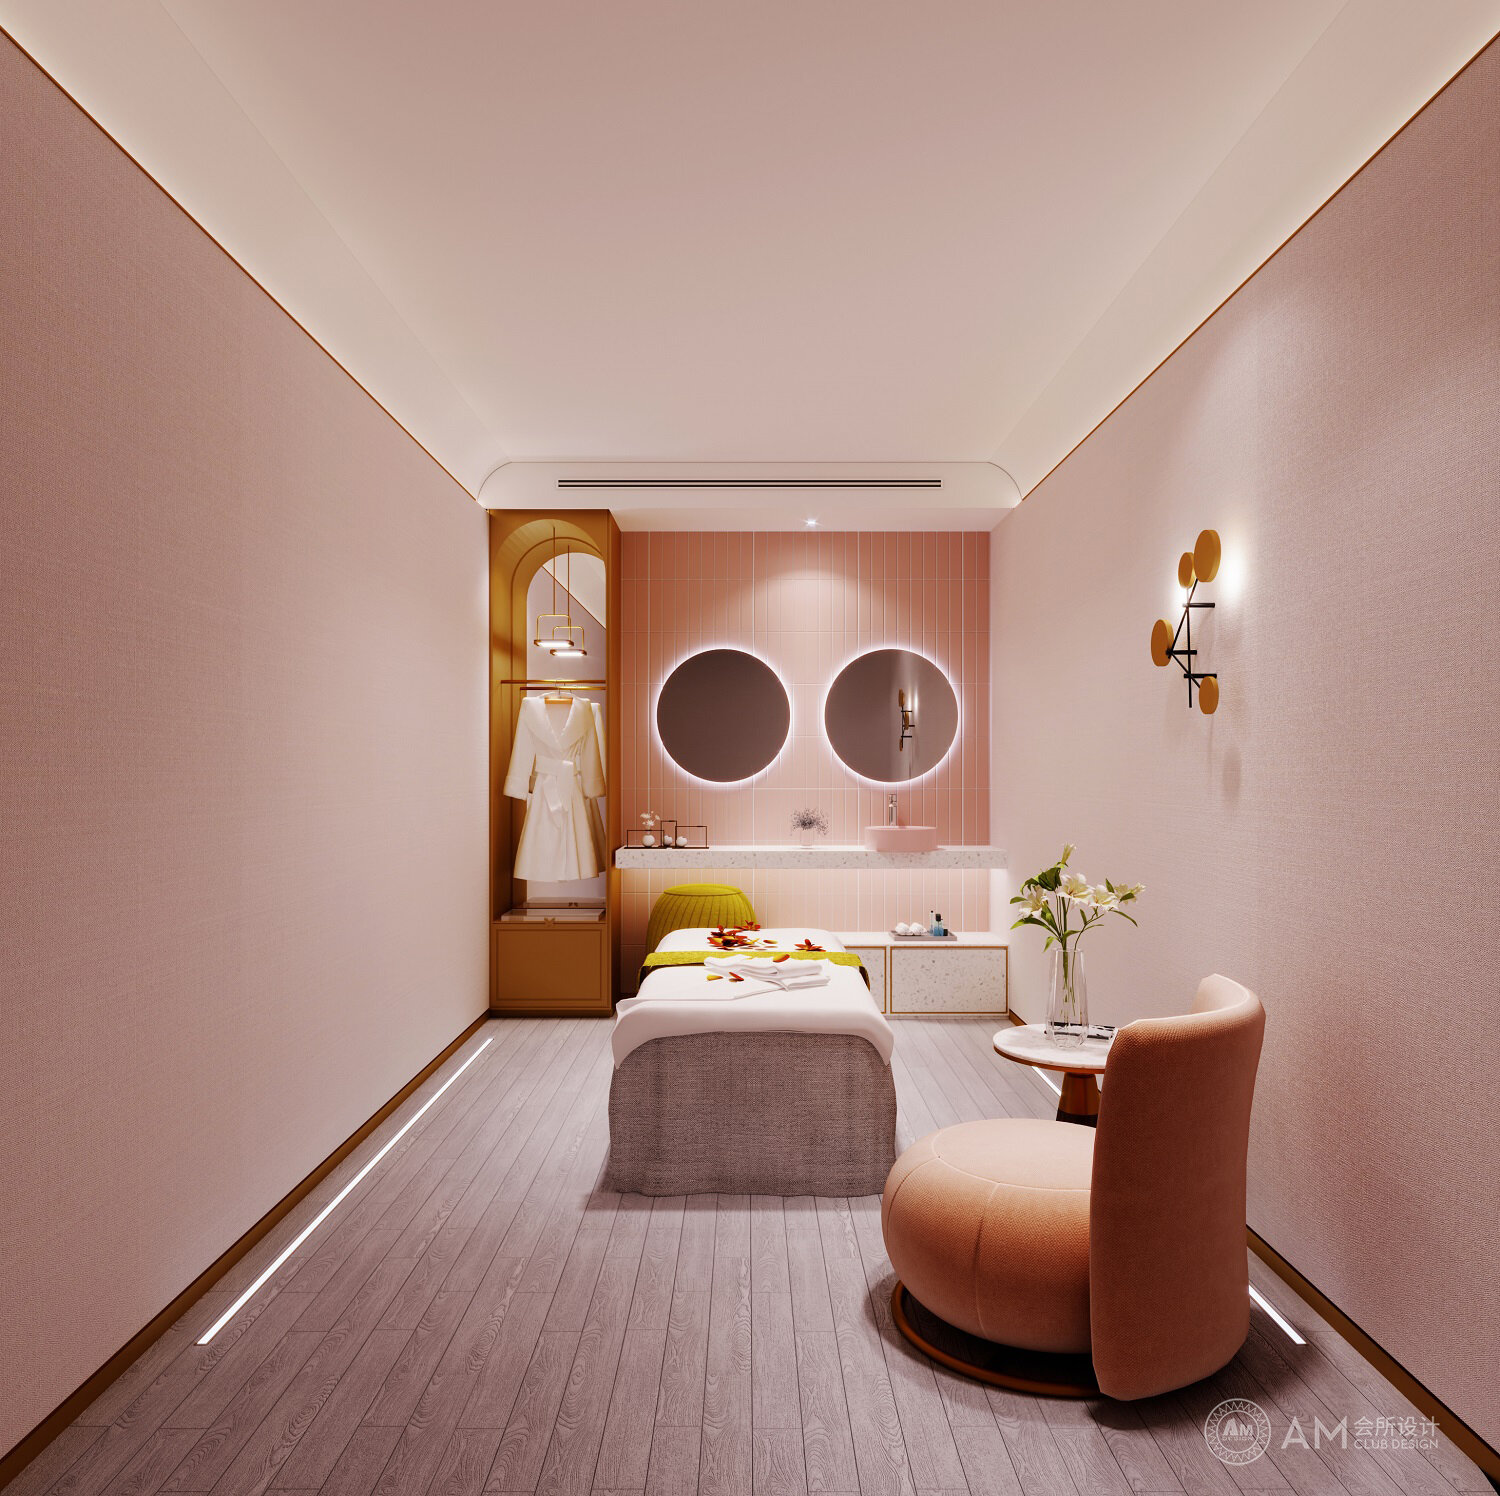 Design of spa room of am| andison beauty salon